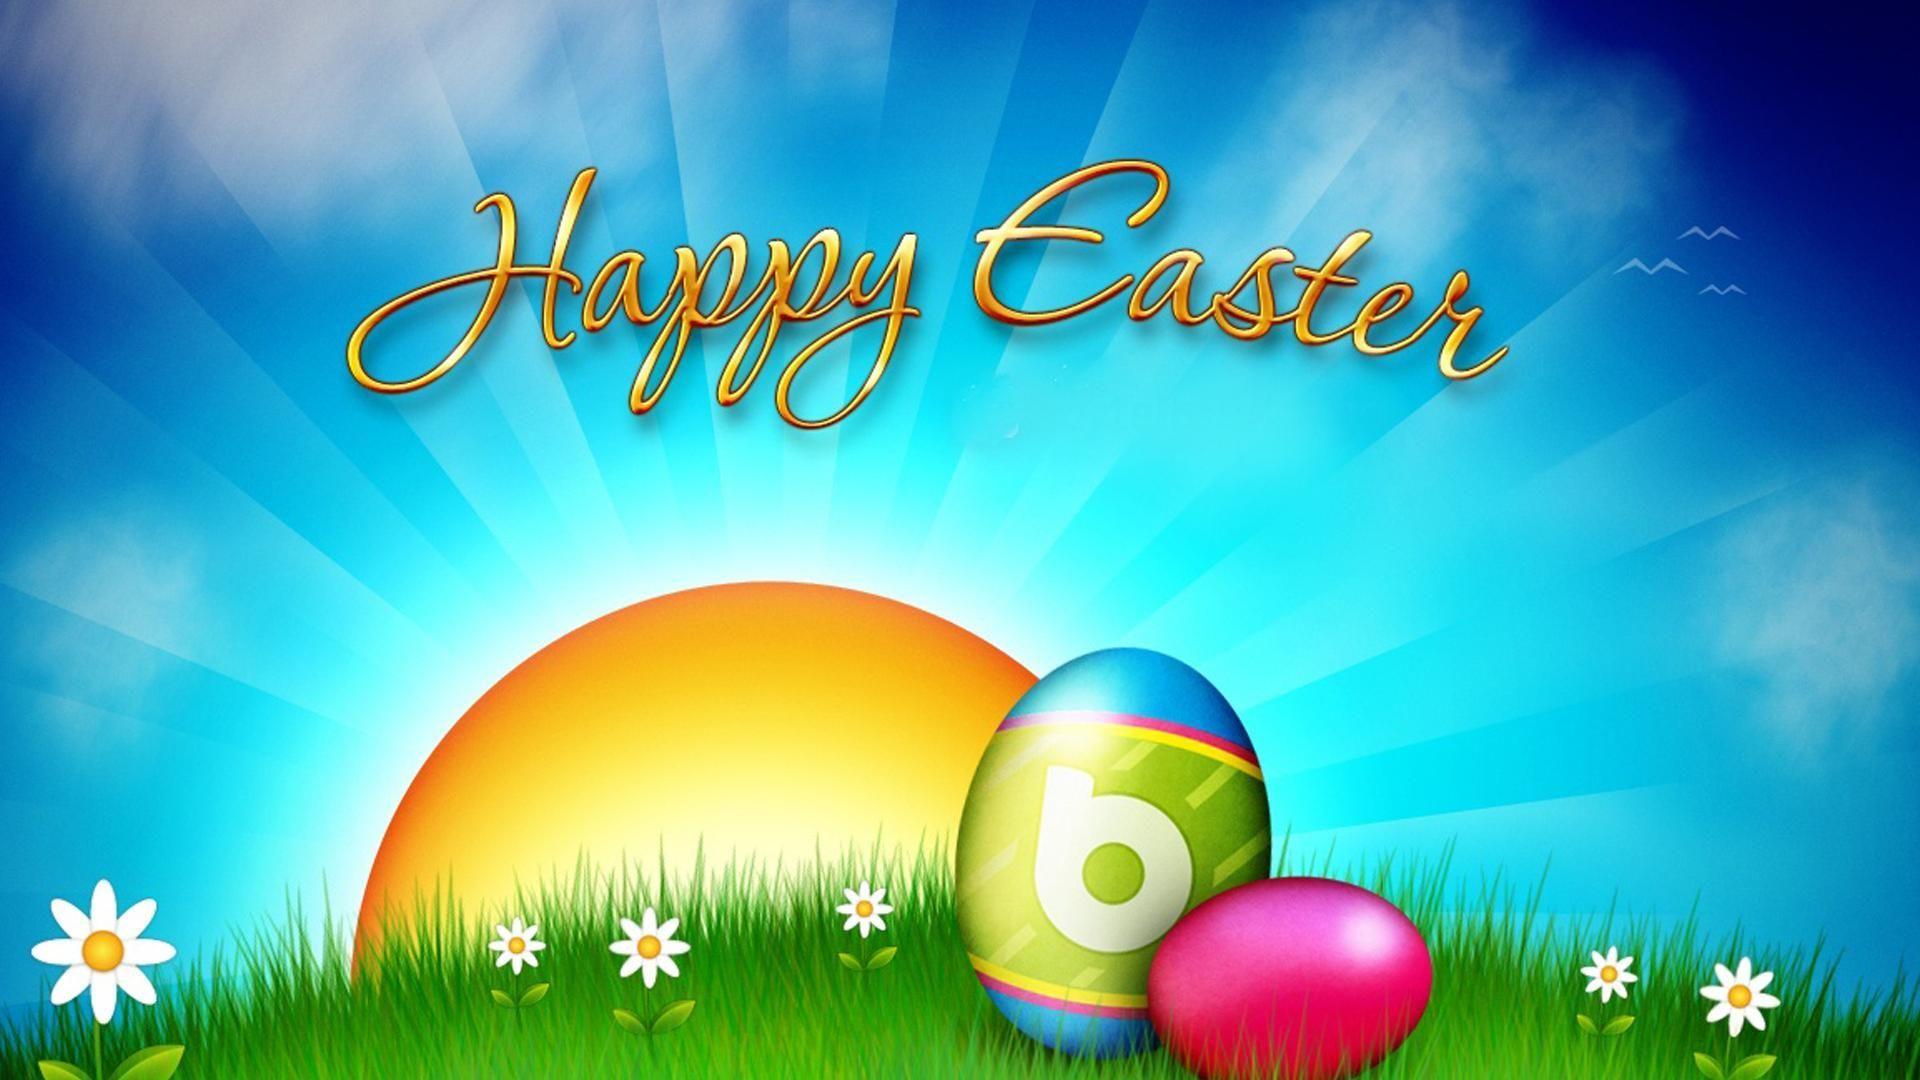 Happy Easter Day Image For Facebook and Whatsapp. Happy easter